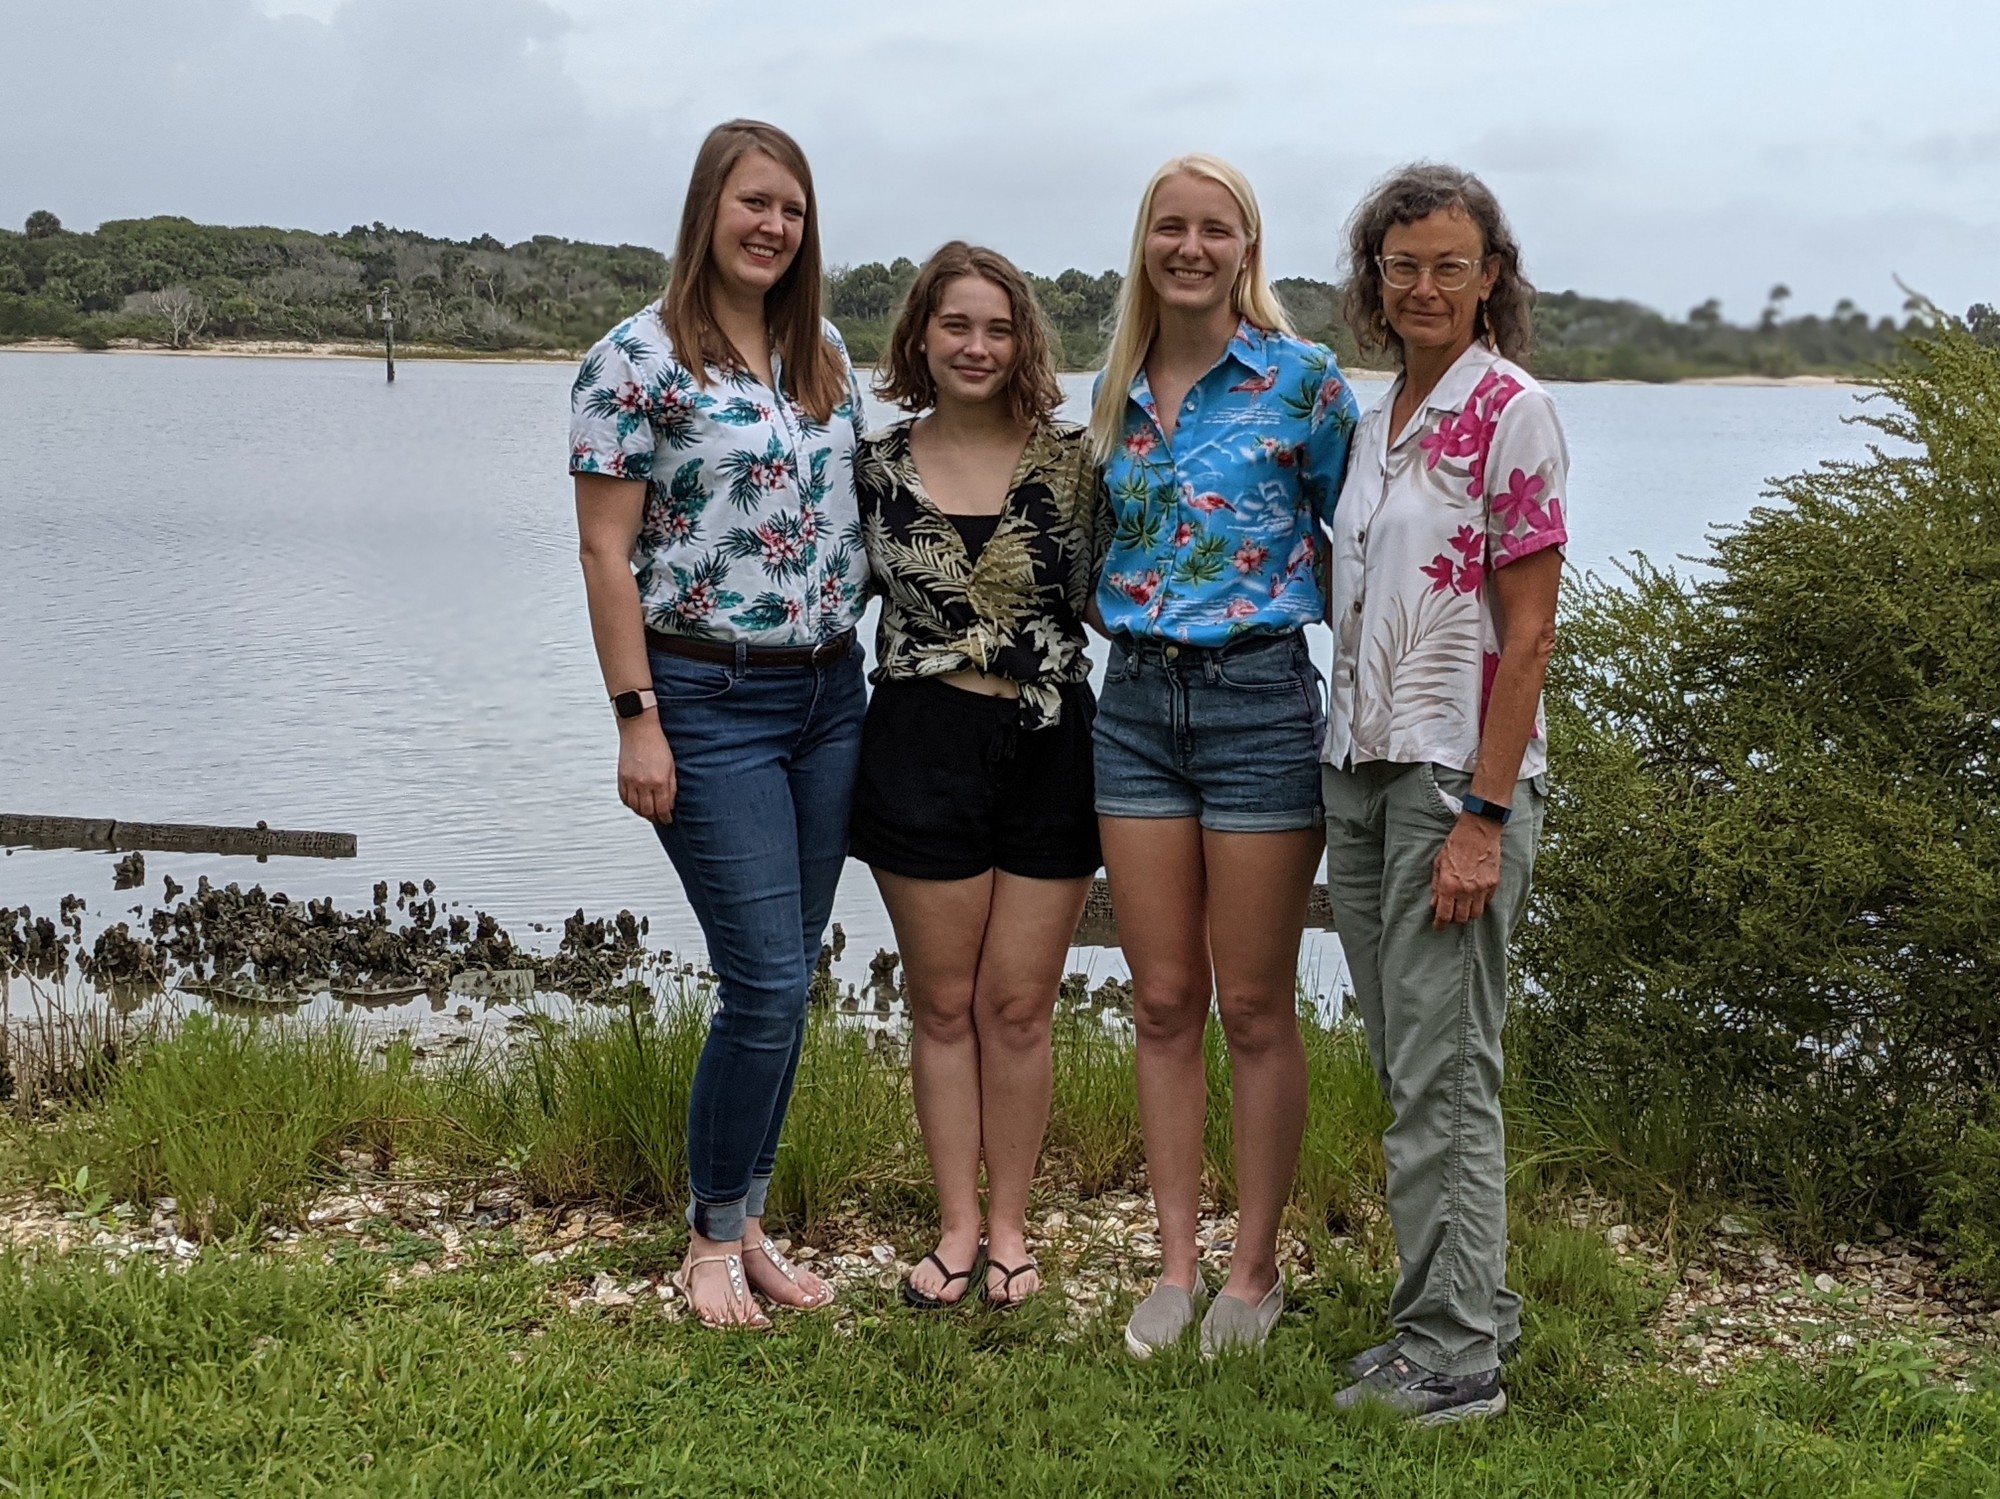 Members of Dr. Elaine Seaver’s research group at UF’s Whitney Laboratory for Marine Bioscience. From left to right: Alicia Boyd, Katie Feerst, Lauren Kunselman, and Dr. Seaver. Image provided by Heather Krumholtz.